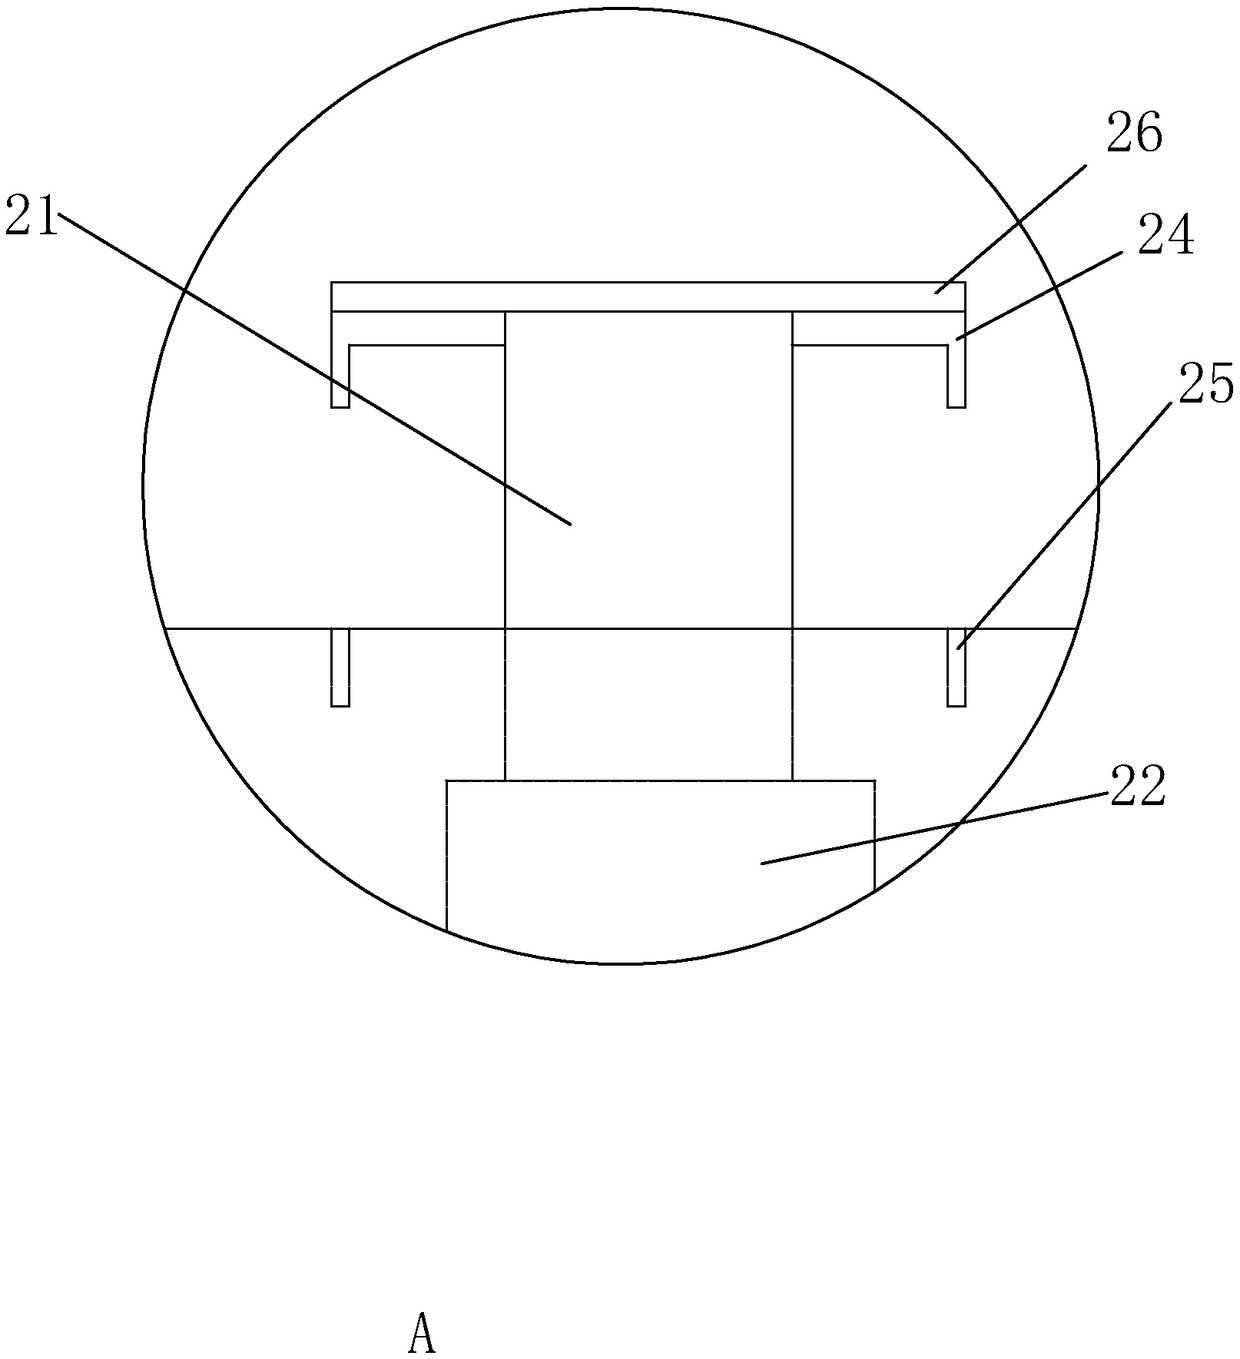 Novel wire winding device for power adapter